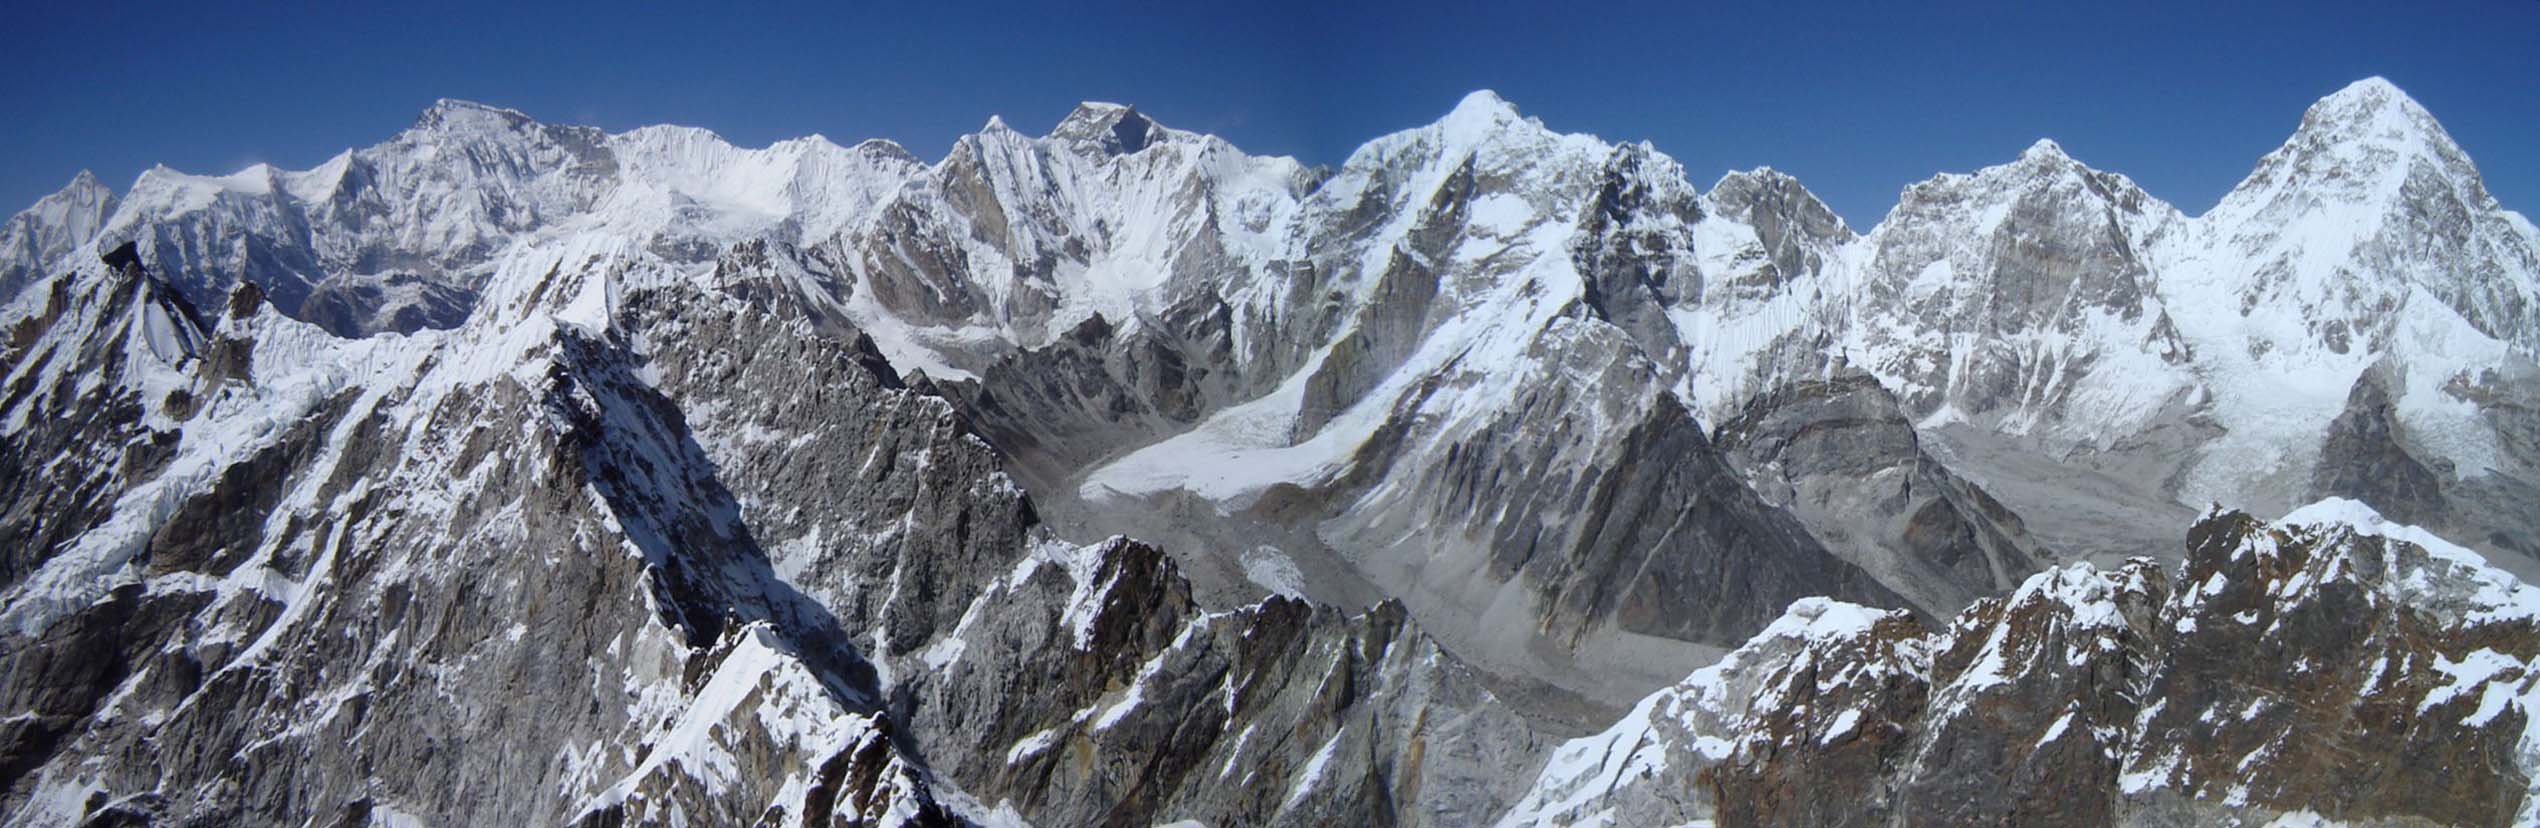 the mighty Himalayas